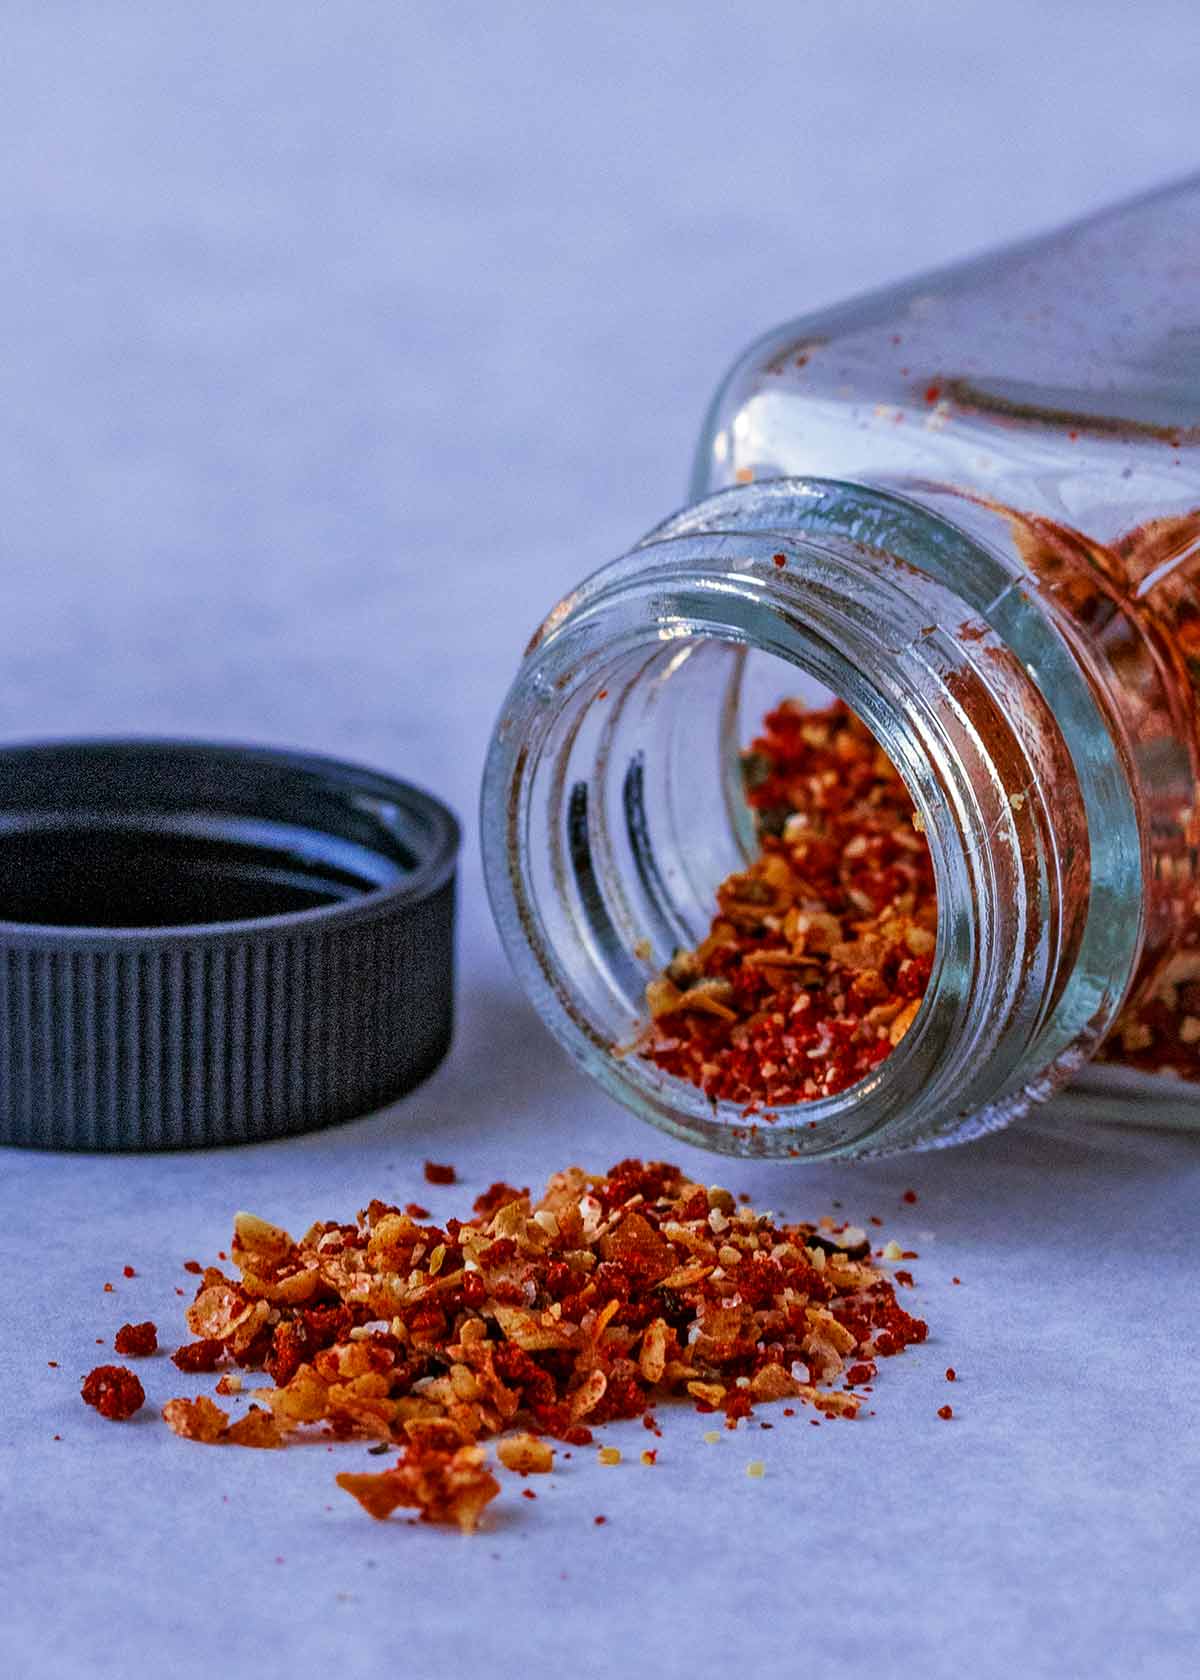 A glass jar, laying down, with a red coloured spice blend spilling out.